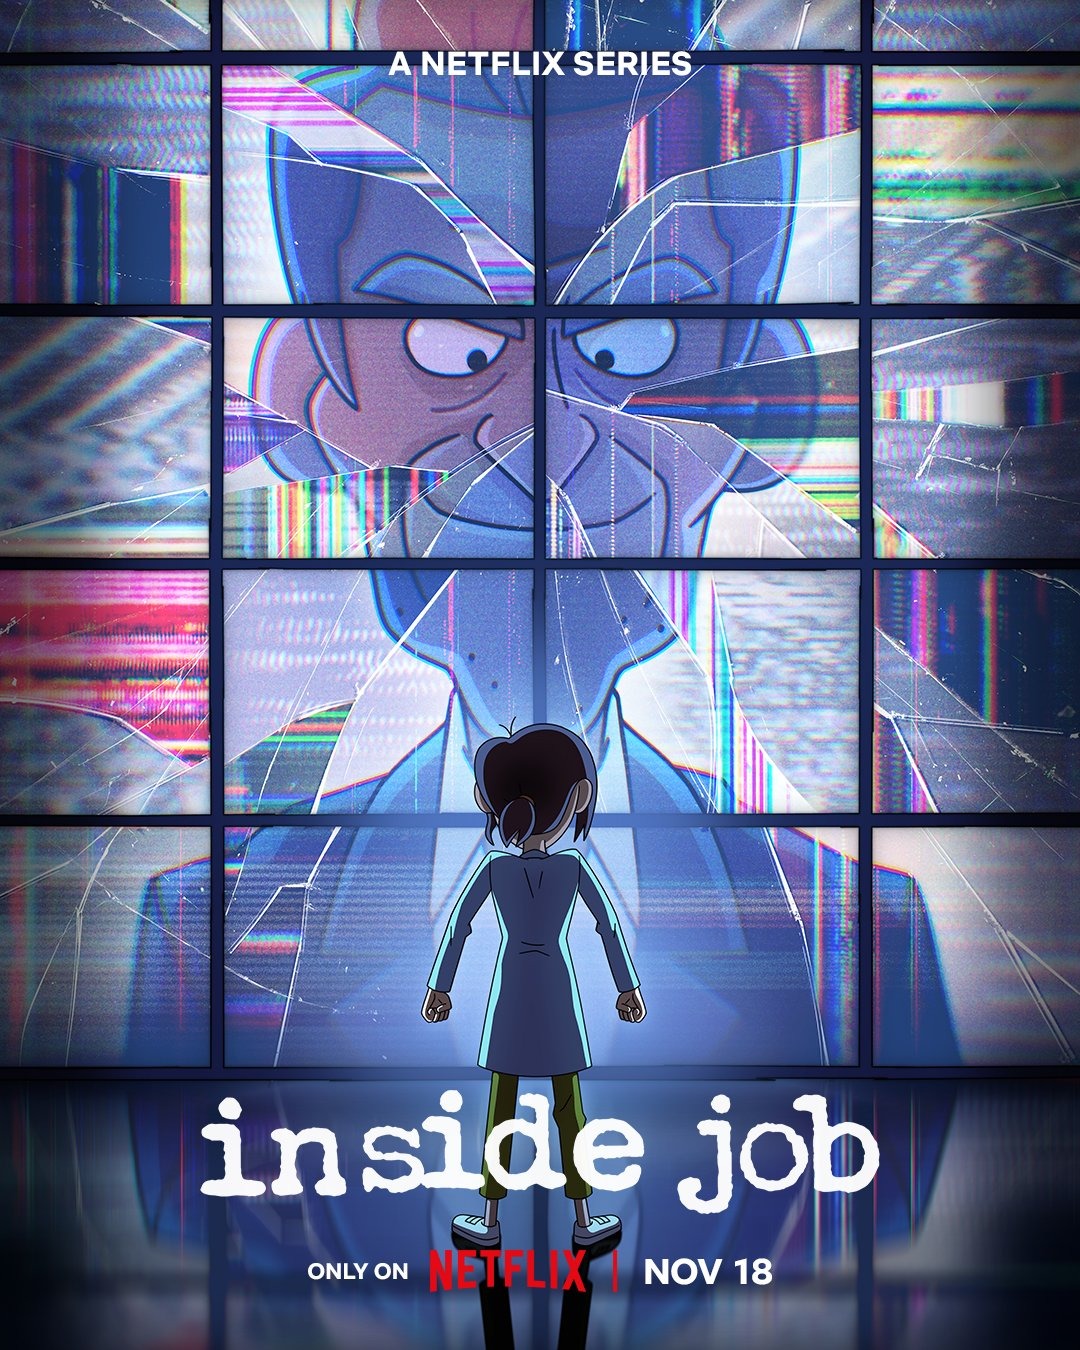 Extra Large TV Poster Image for Inside Job (#4 of 6)